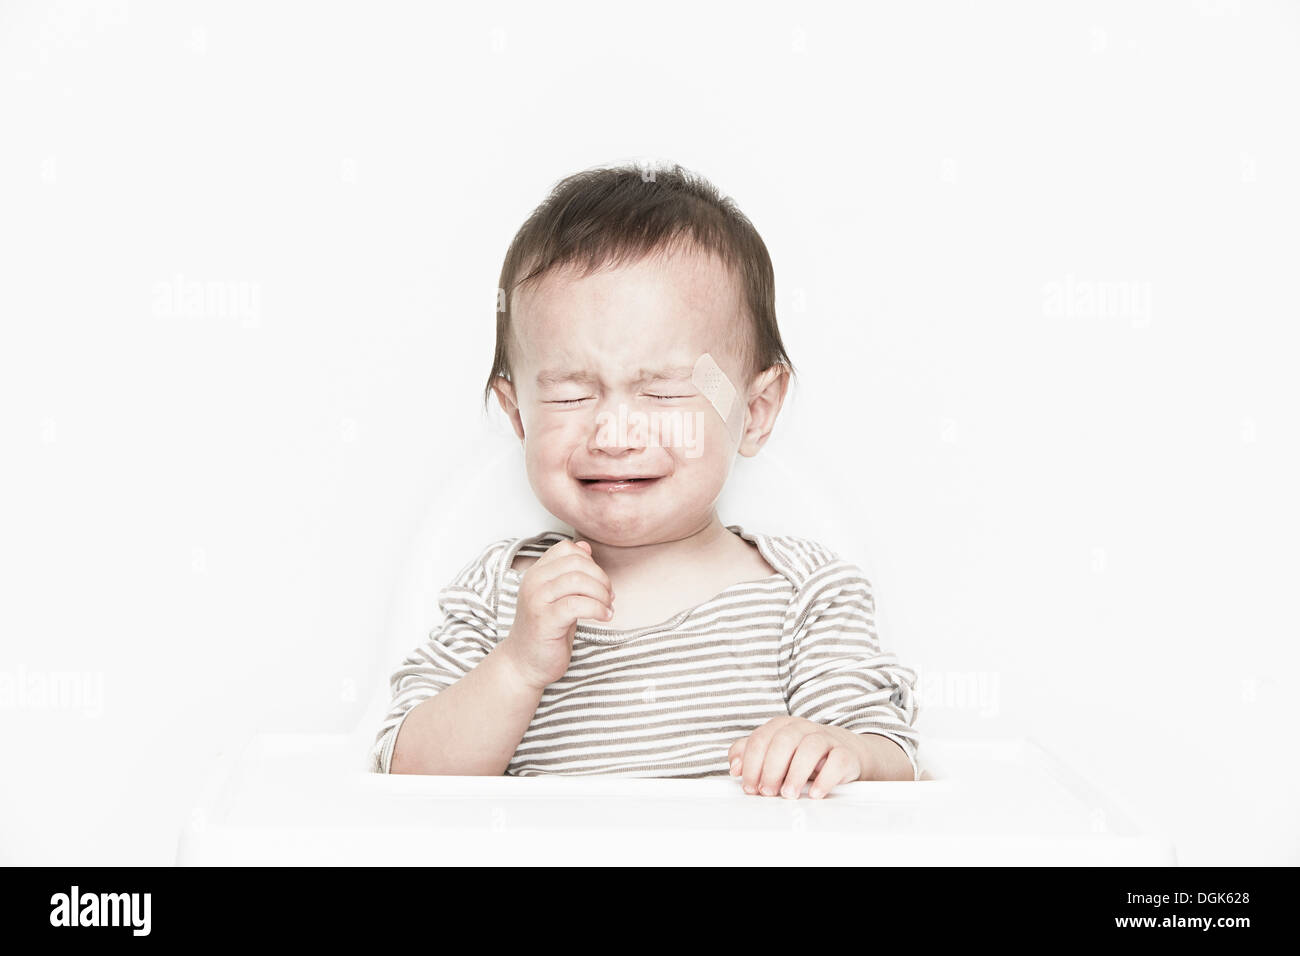 Baby boy with adhesive plaster on face, crying Stock Photo